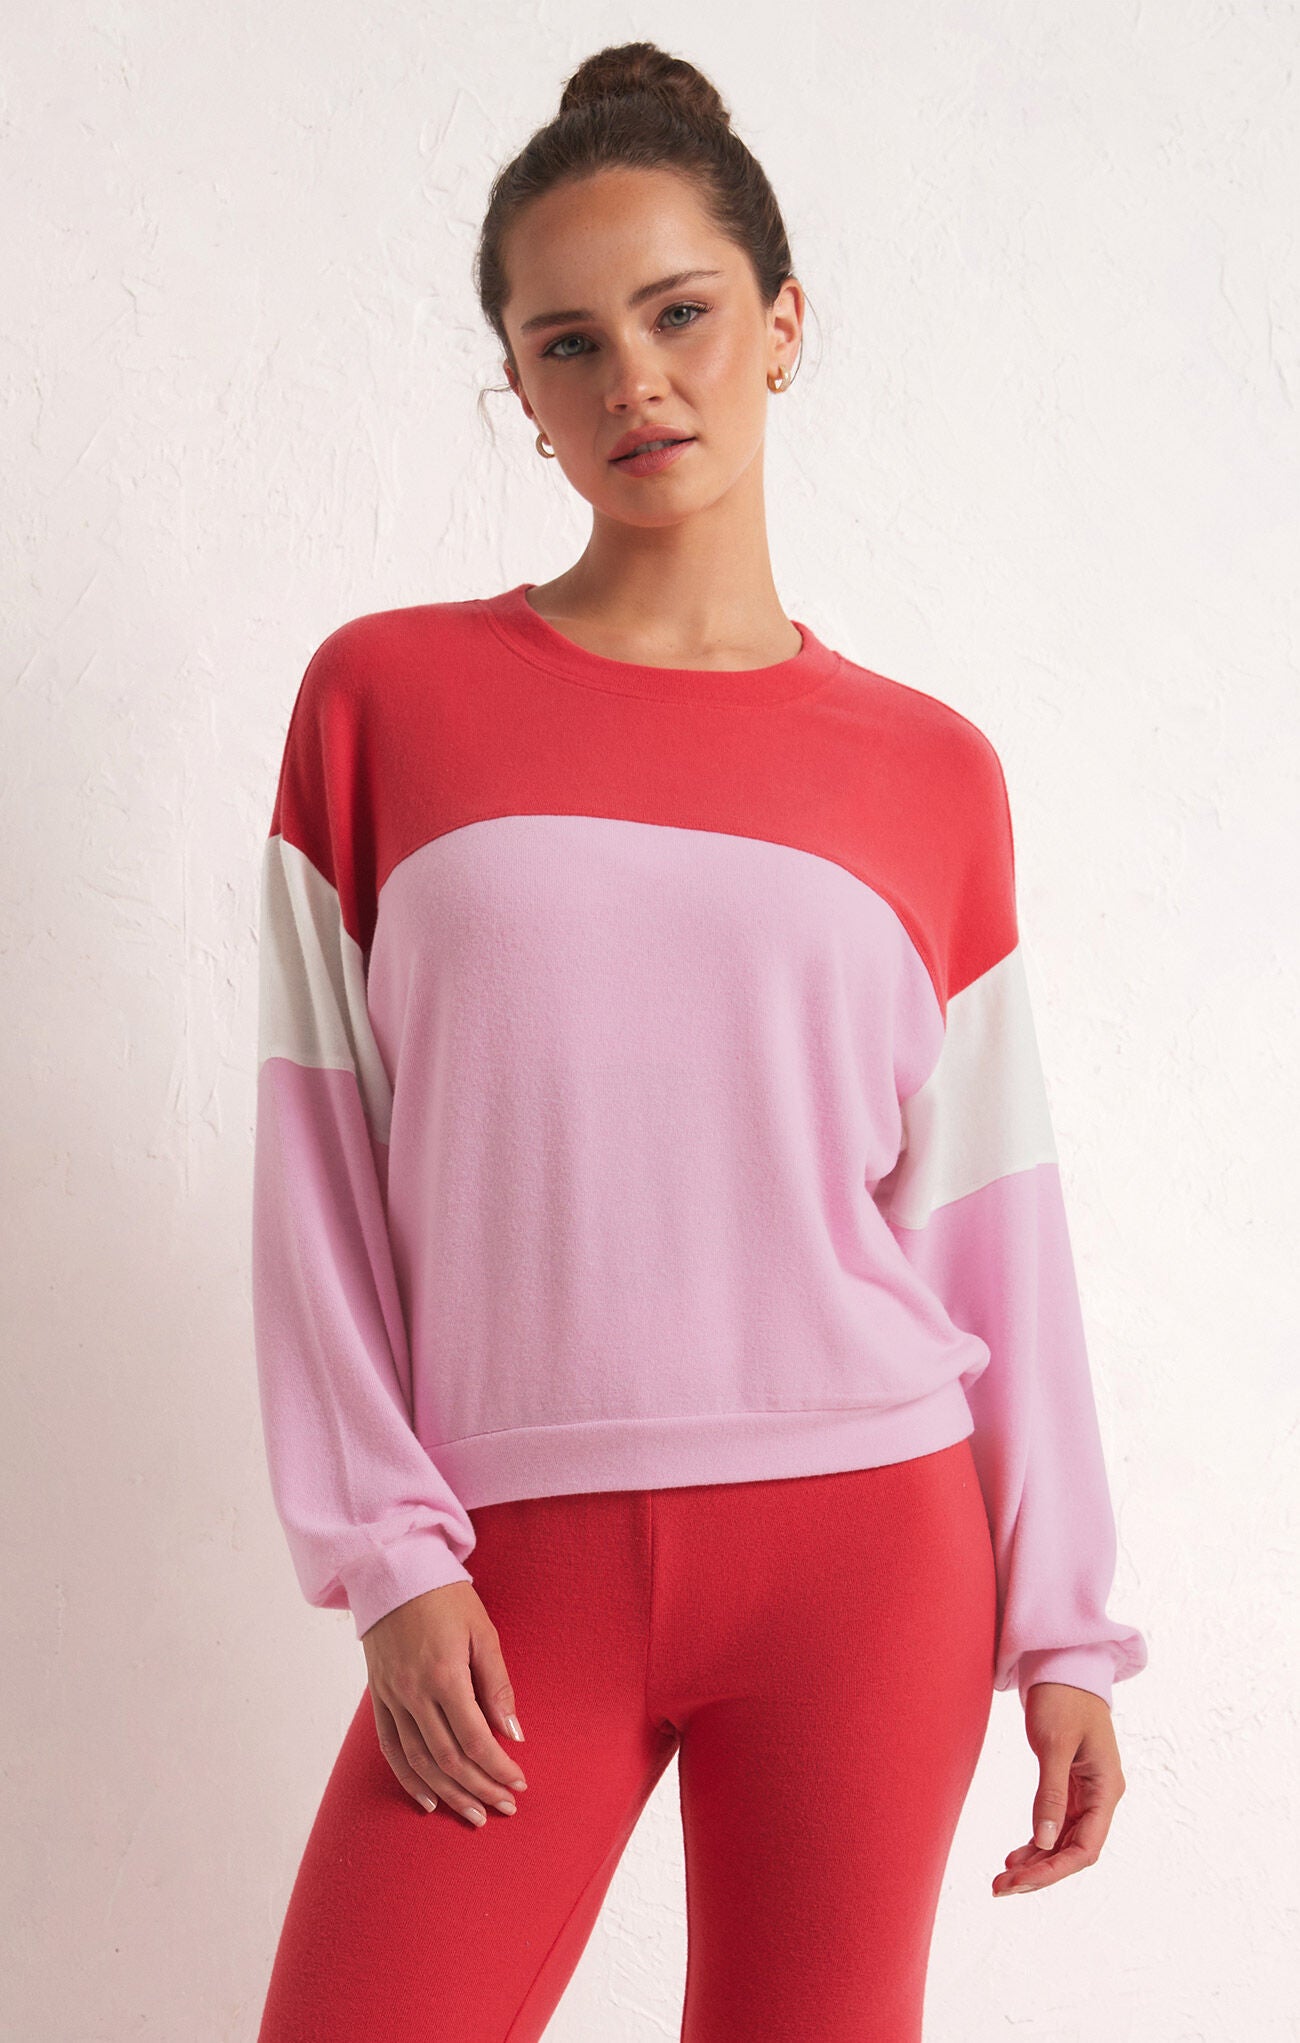 Cotton Candy Colorblock Top